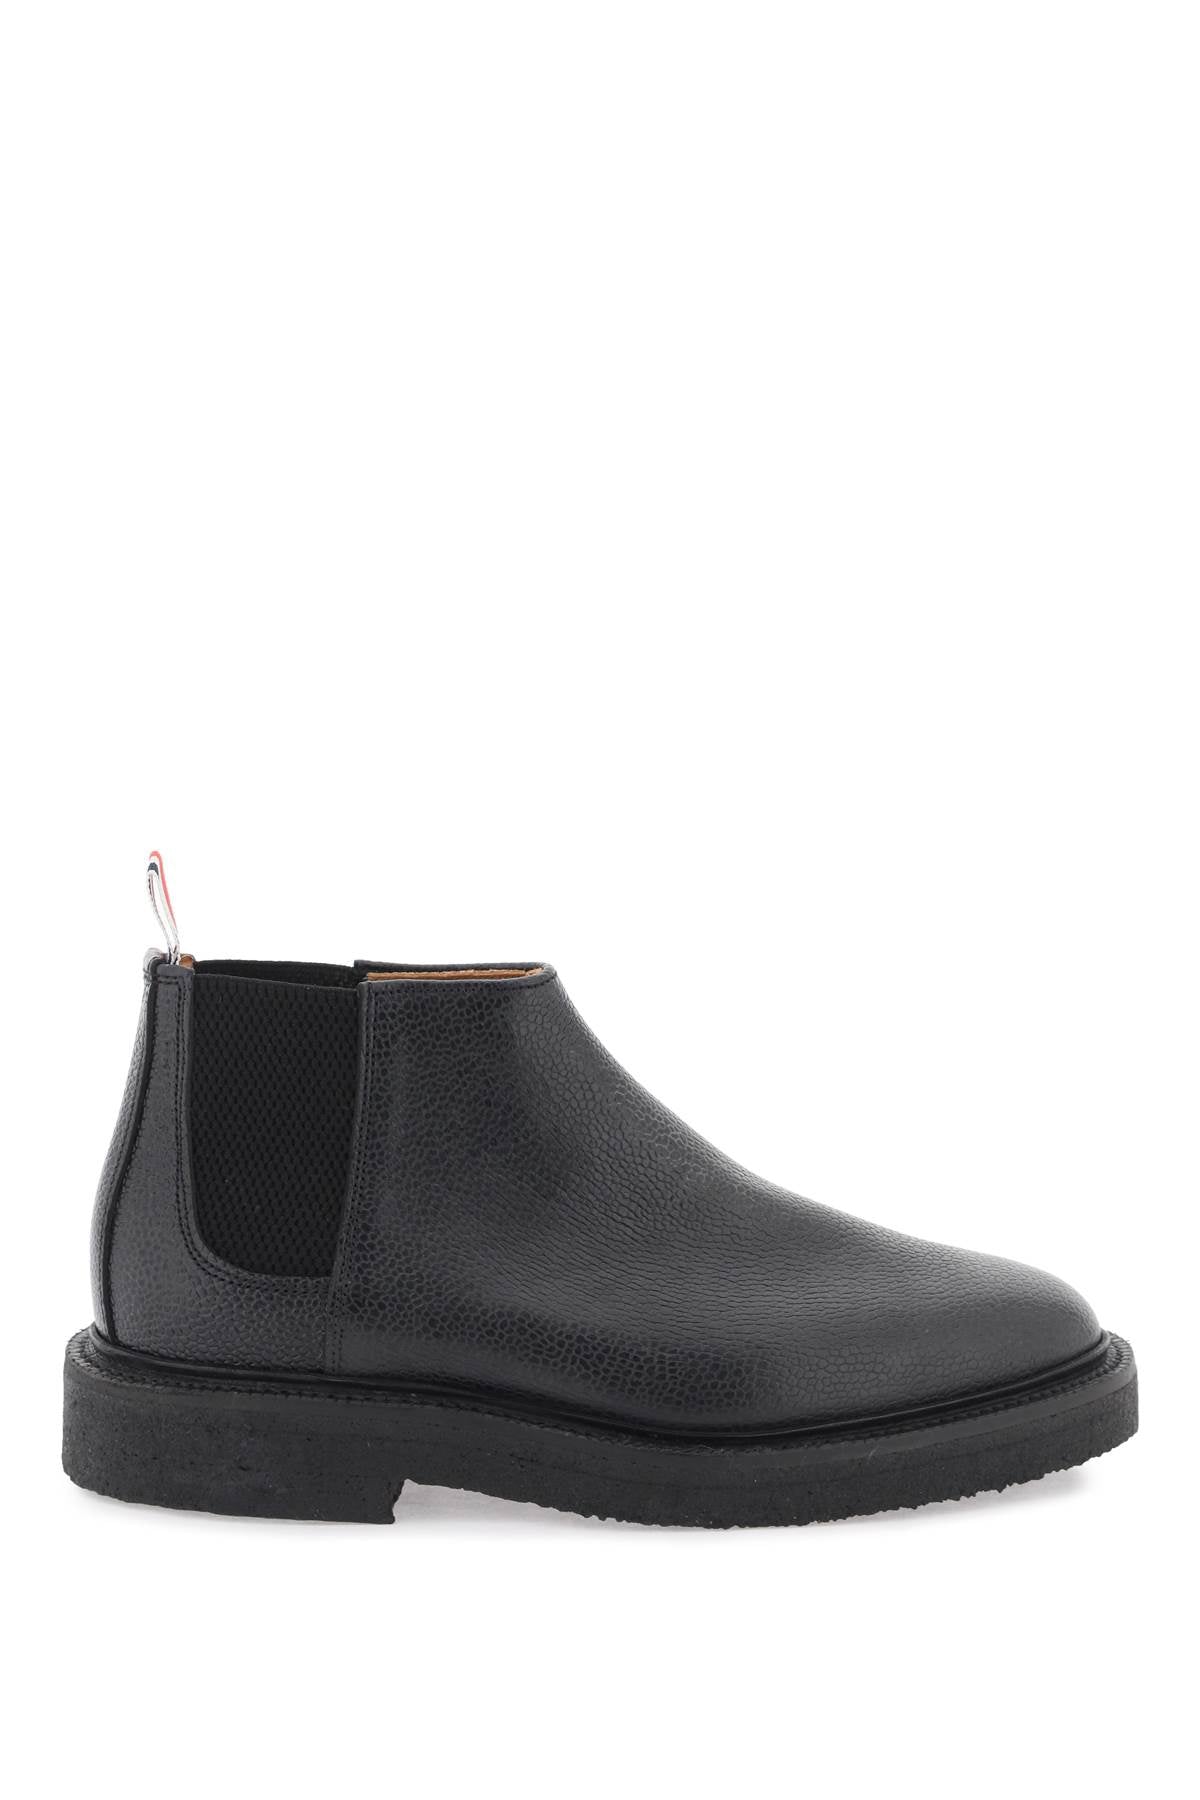 Thom browne mid top chelsea ankle boots-0